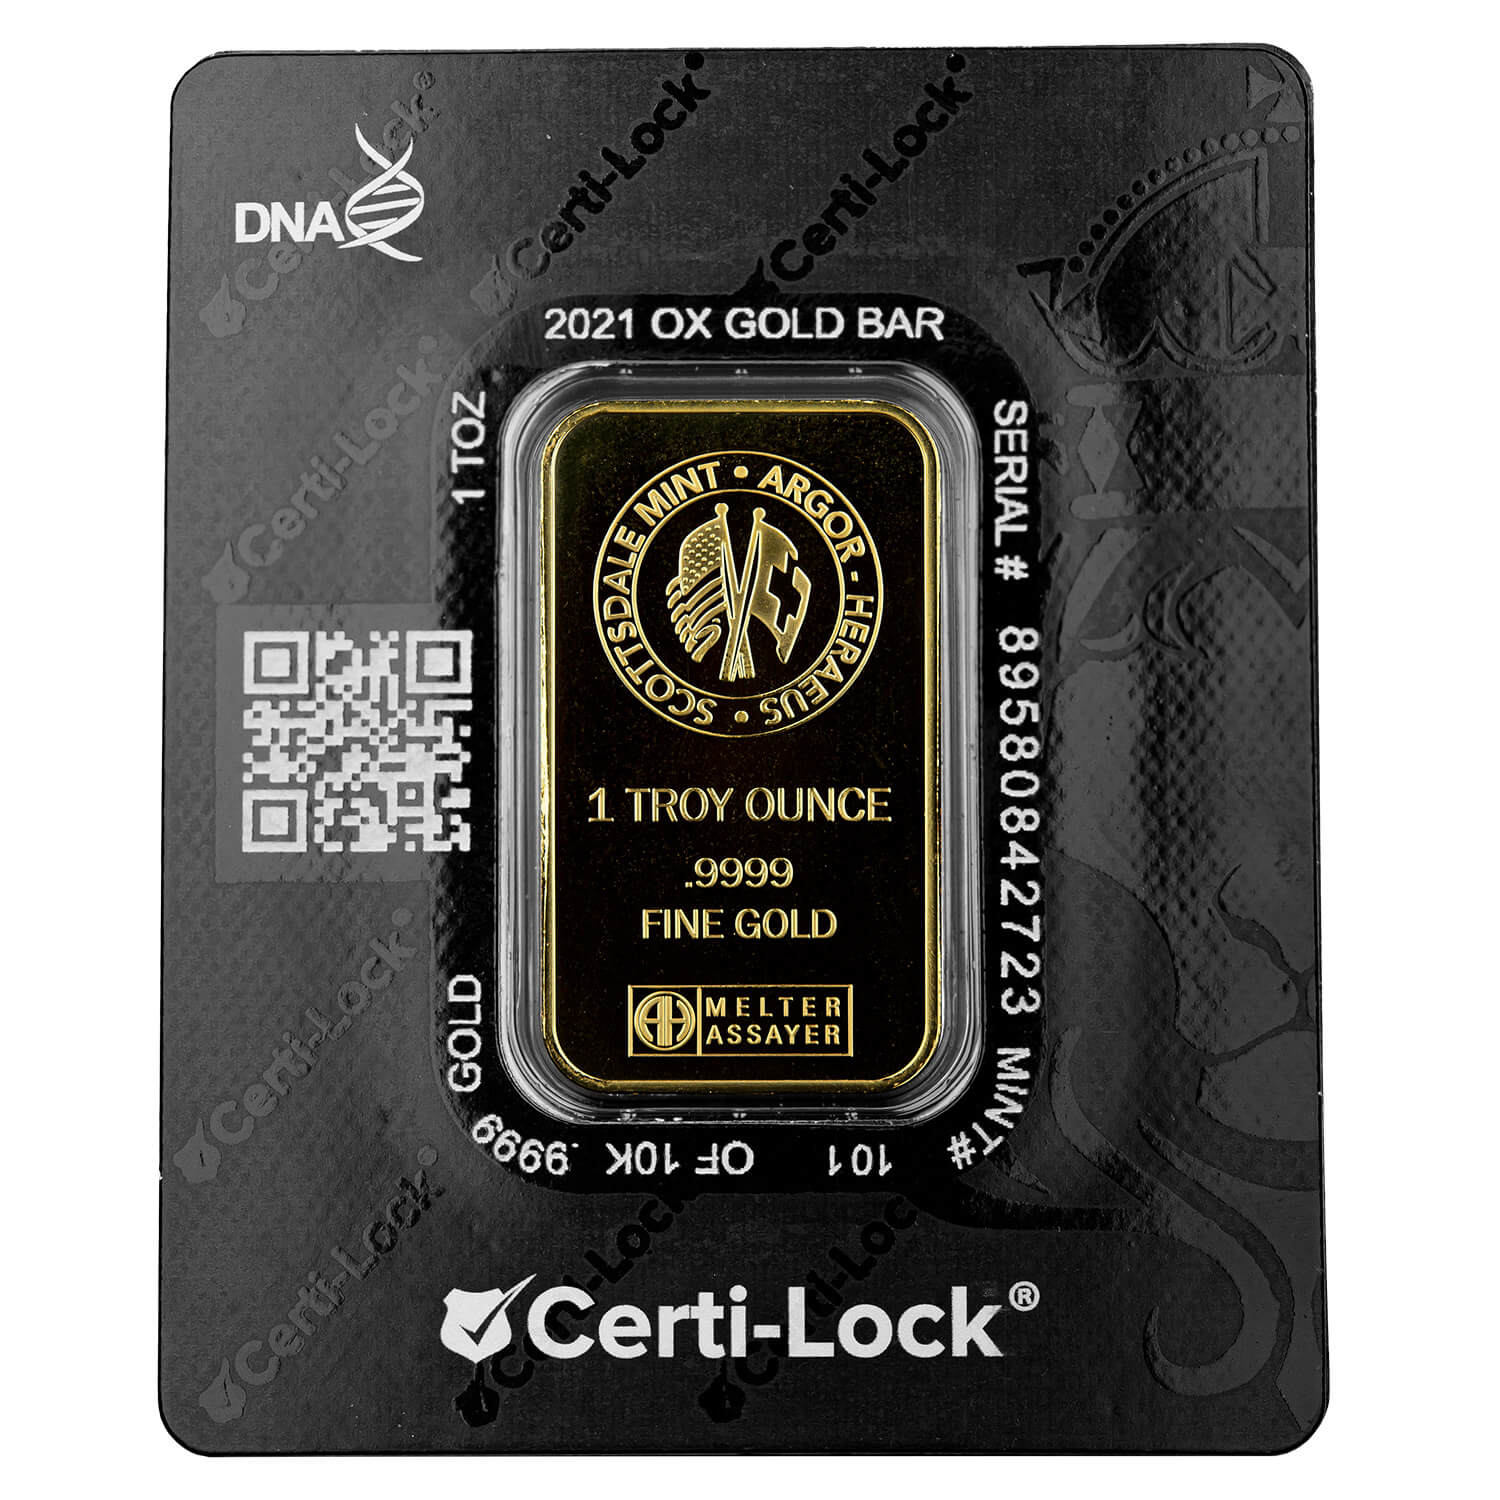 2021 Year of the Ox 1oz Gold